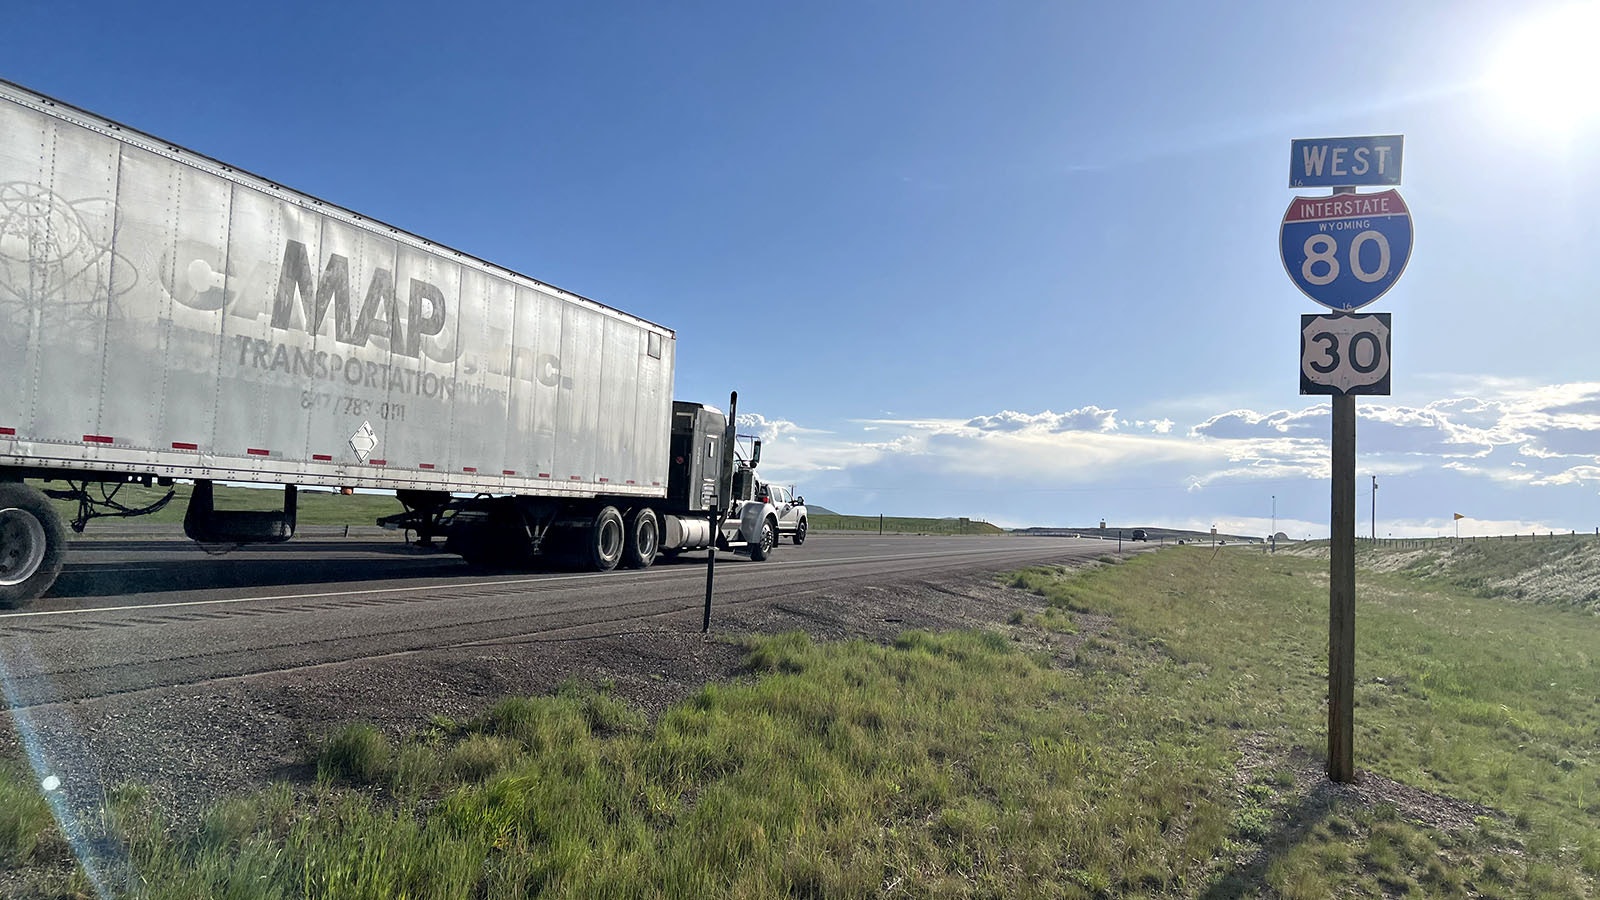 Wyoming Department of Transportation data shows that 90% of commercial vehicle crashes along Interstate 80 through the Cowboy State involve out-of-state drivers.